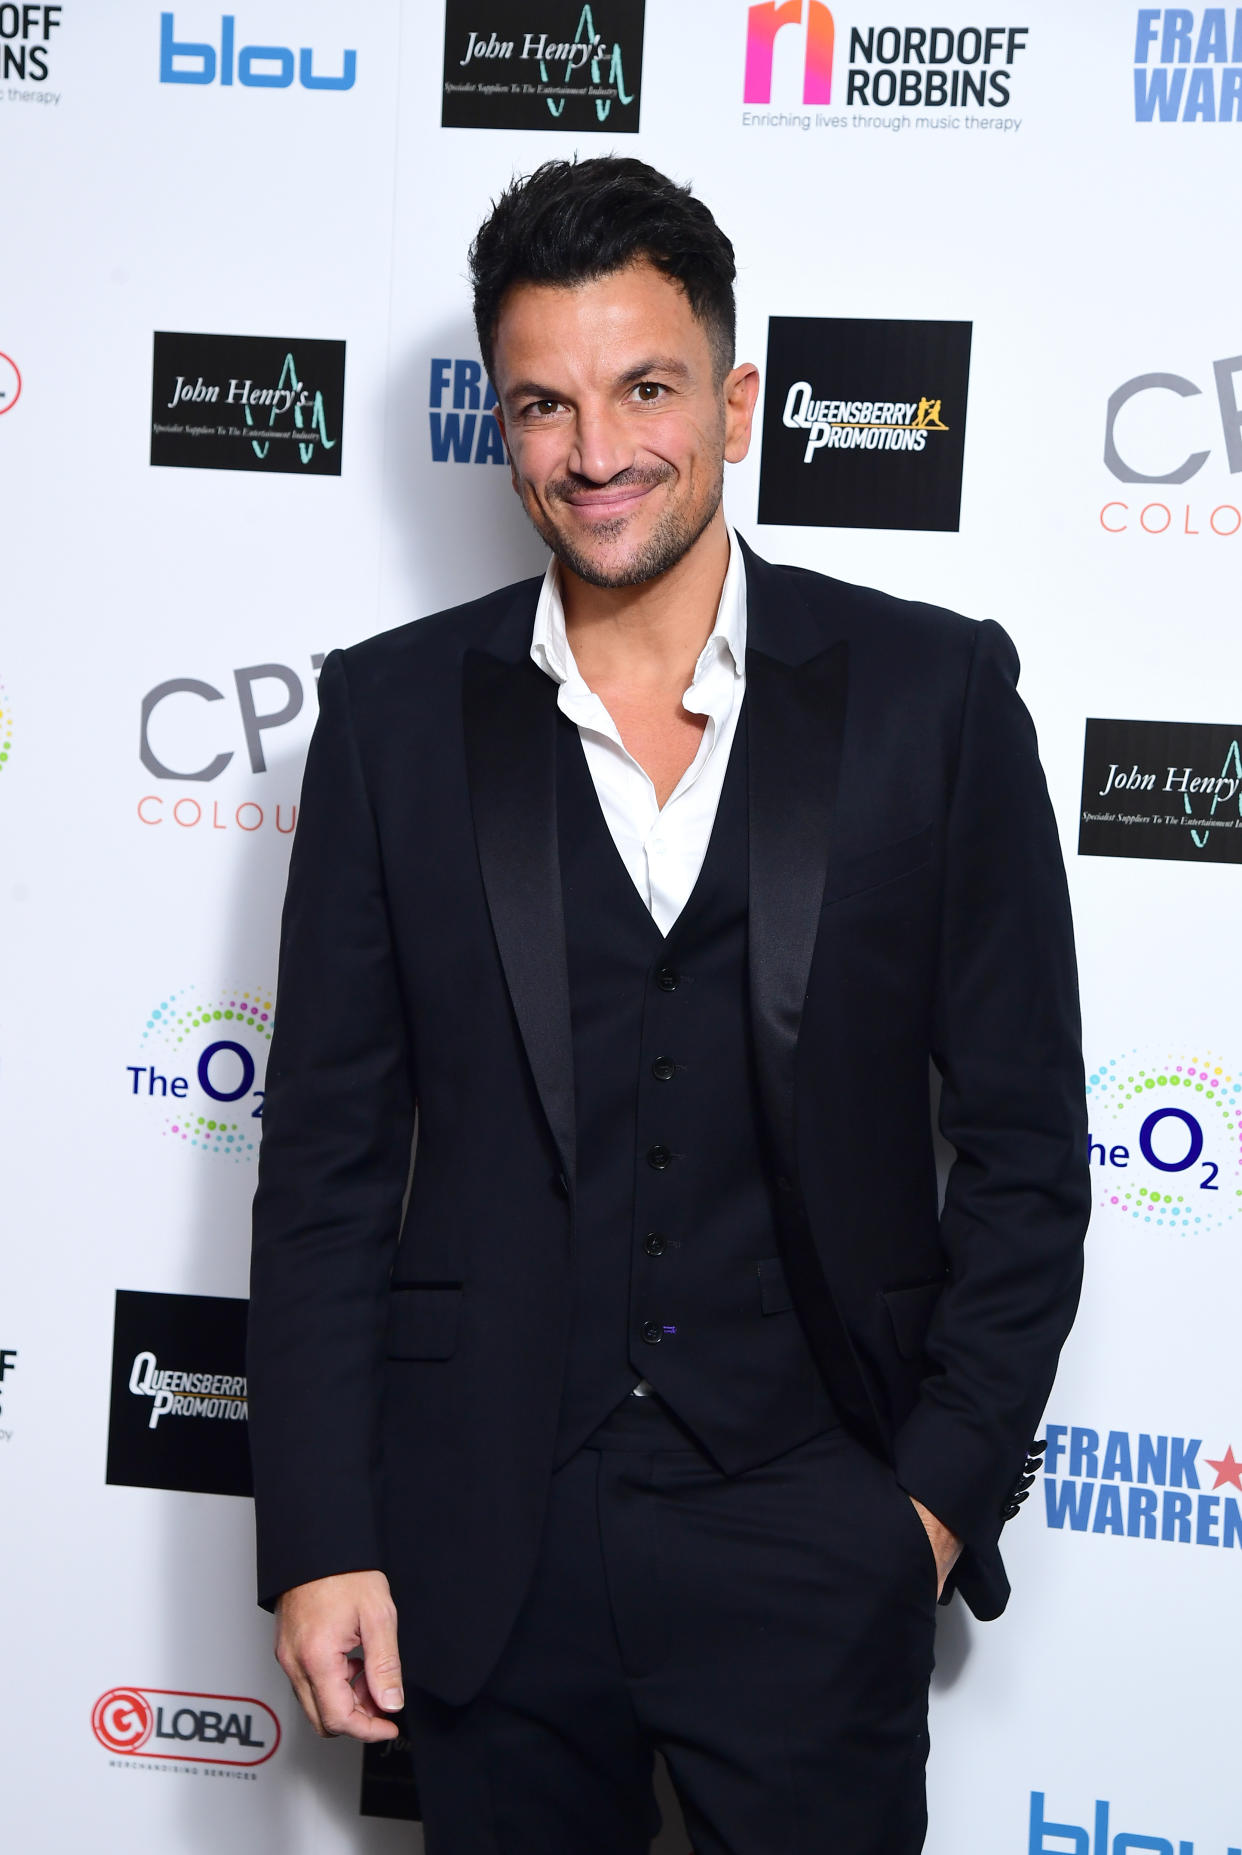 Peter Andre attending the Nordoff Robbins Boxing Dinner held at the Hilton Hotel, London.